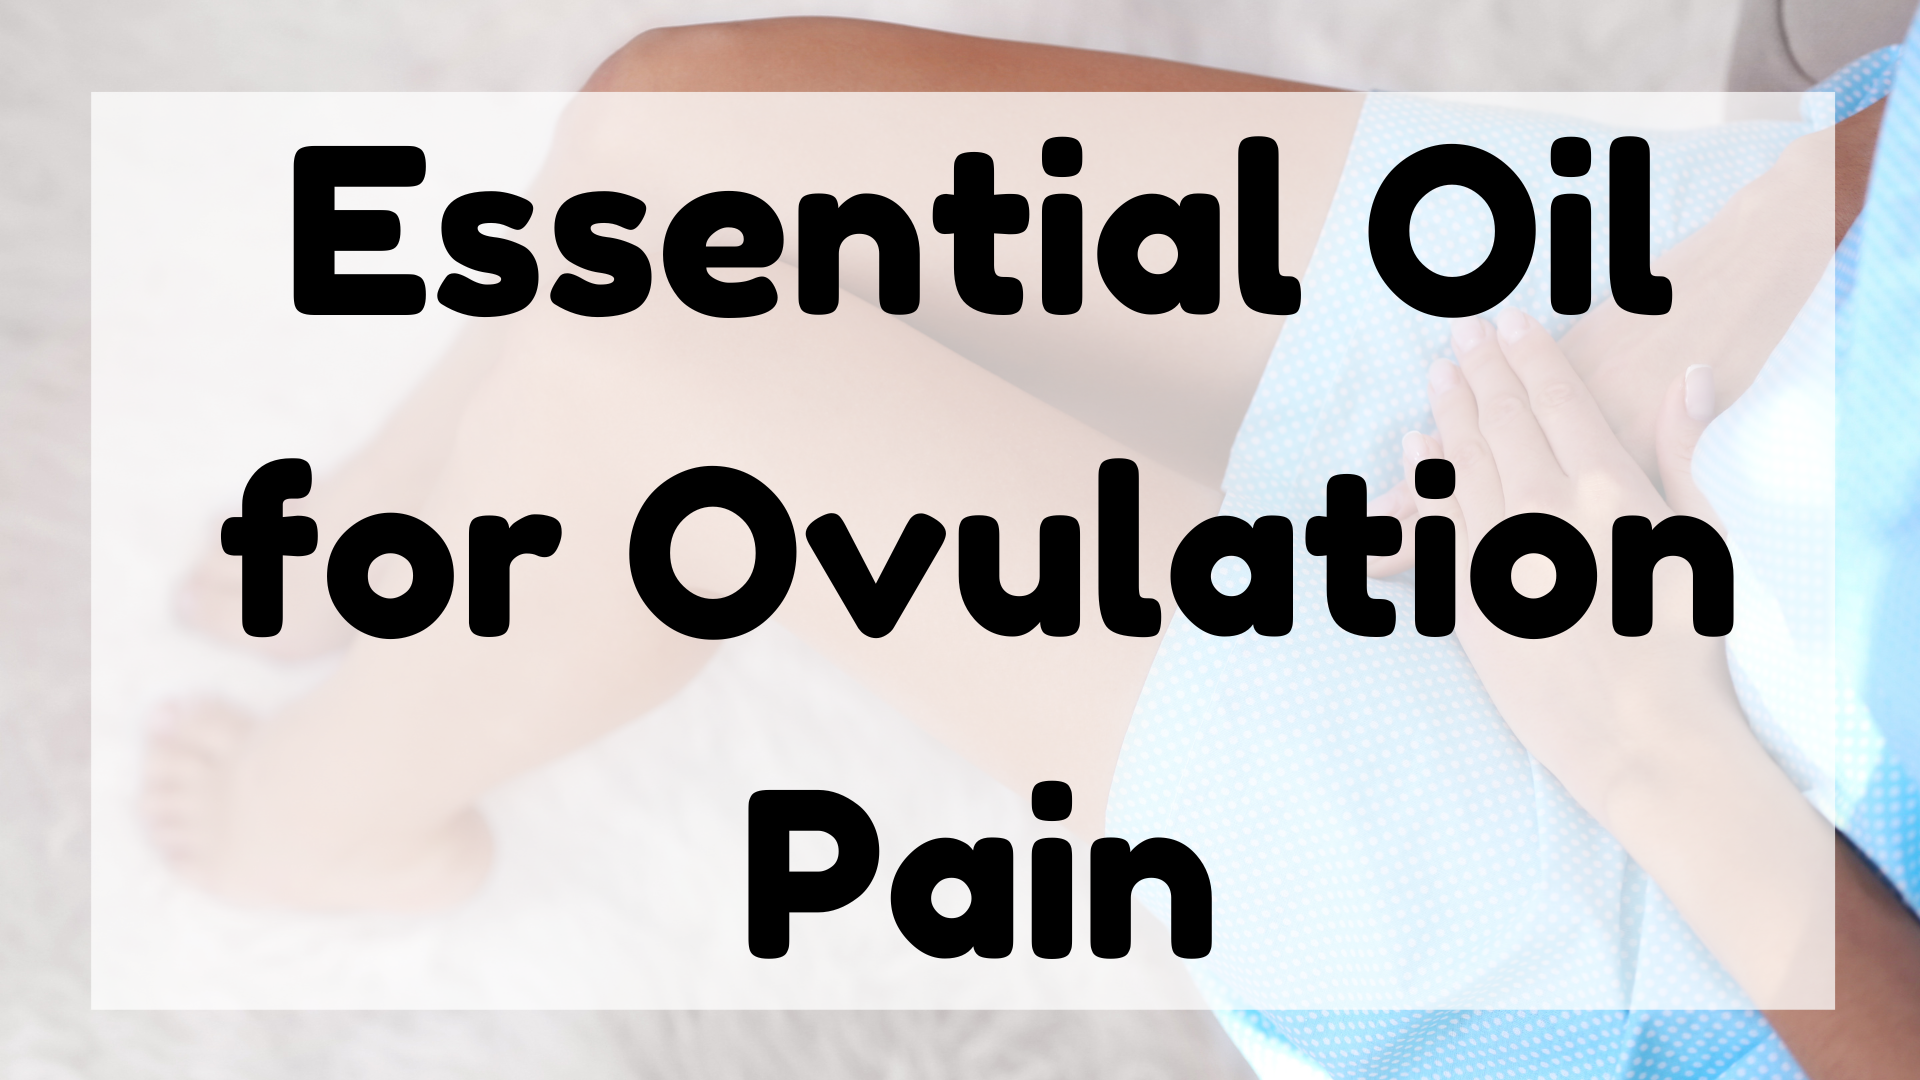 Essential Oil for Ovulation Pain featured image